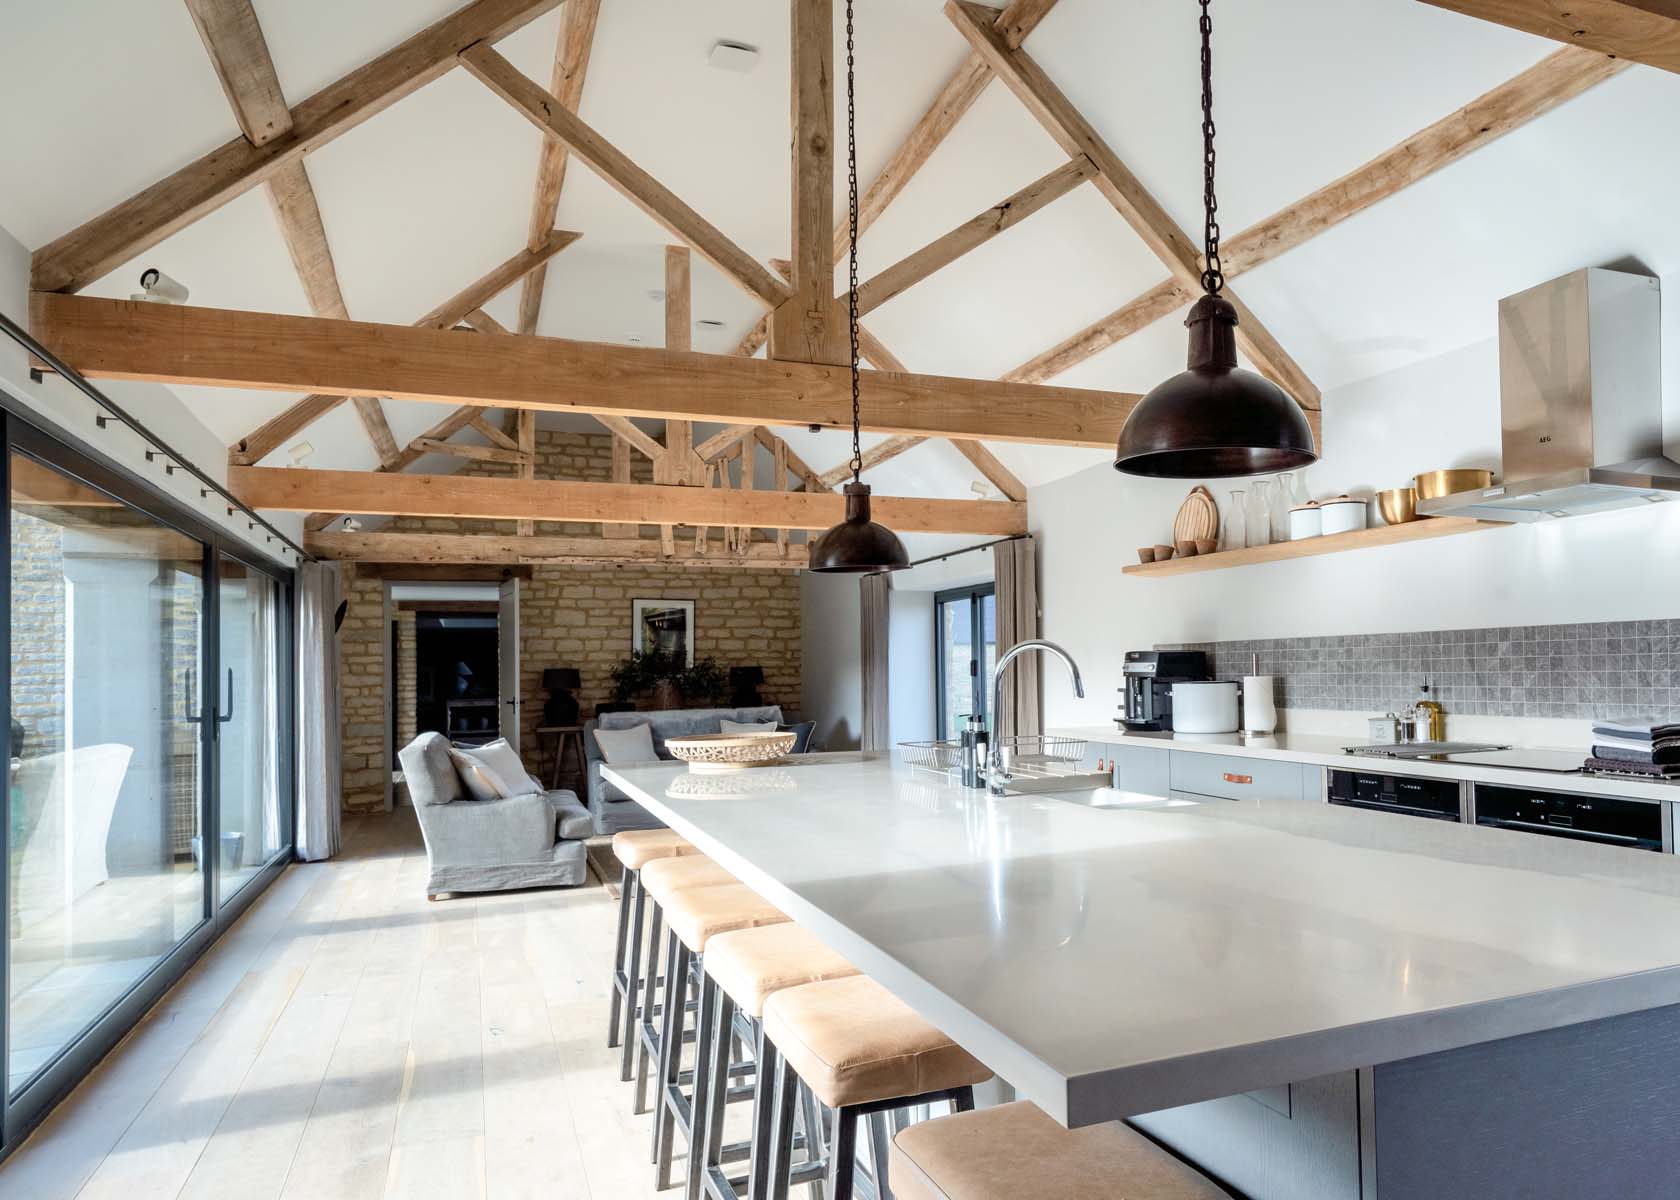 A large open plan kitchen area with exposed wooden beams